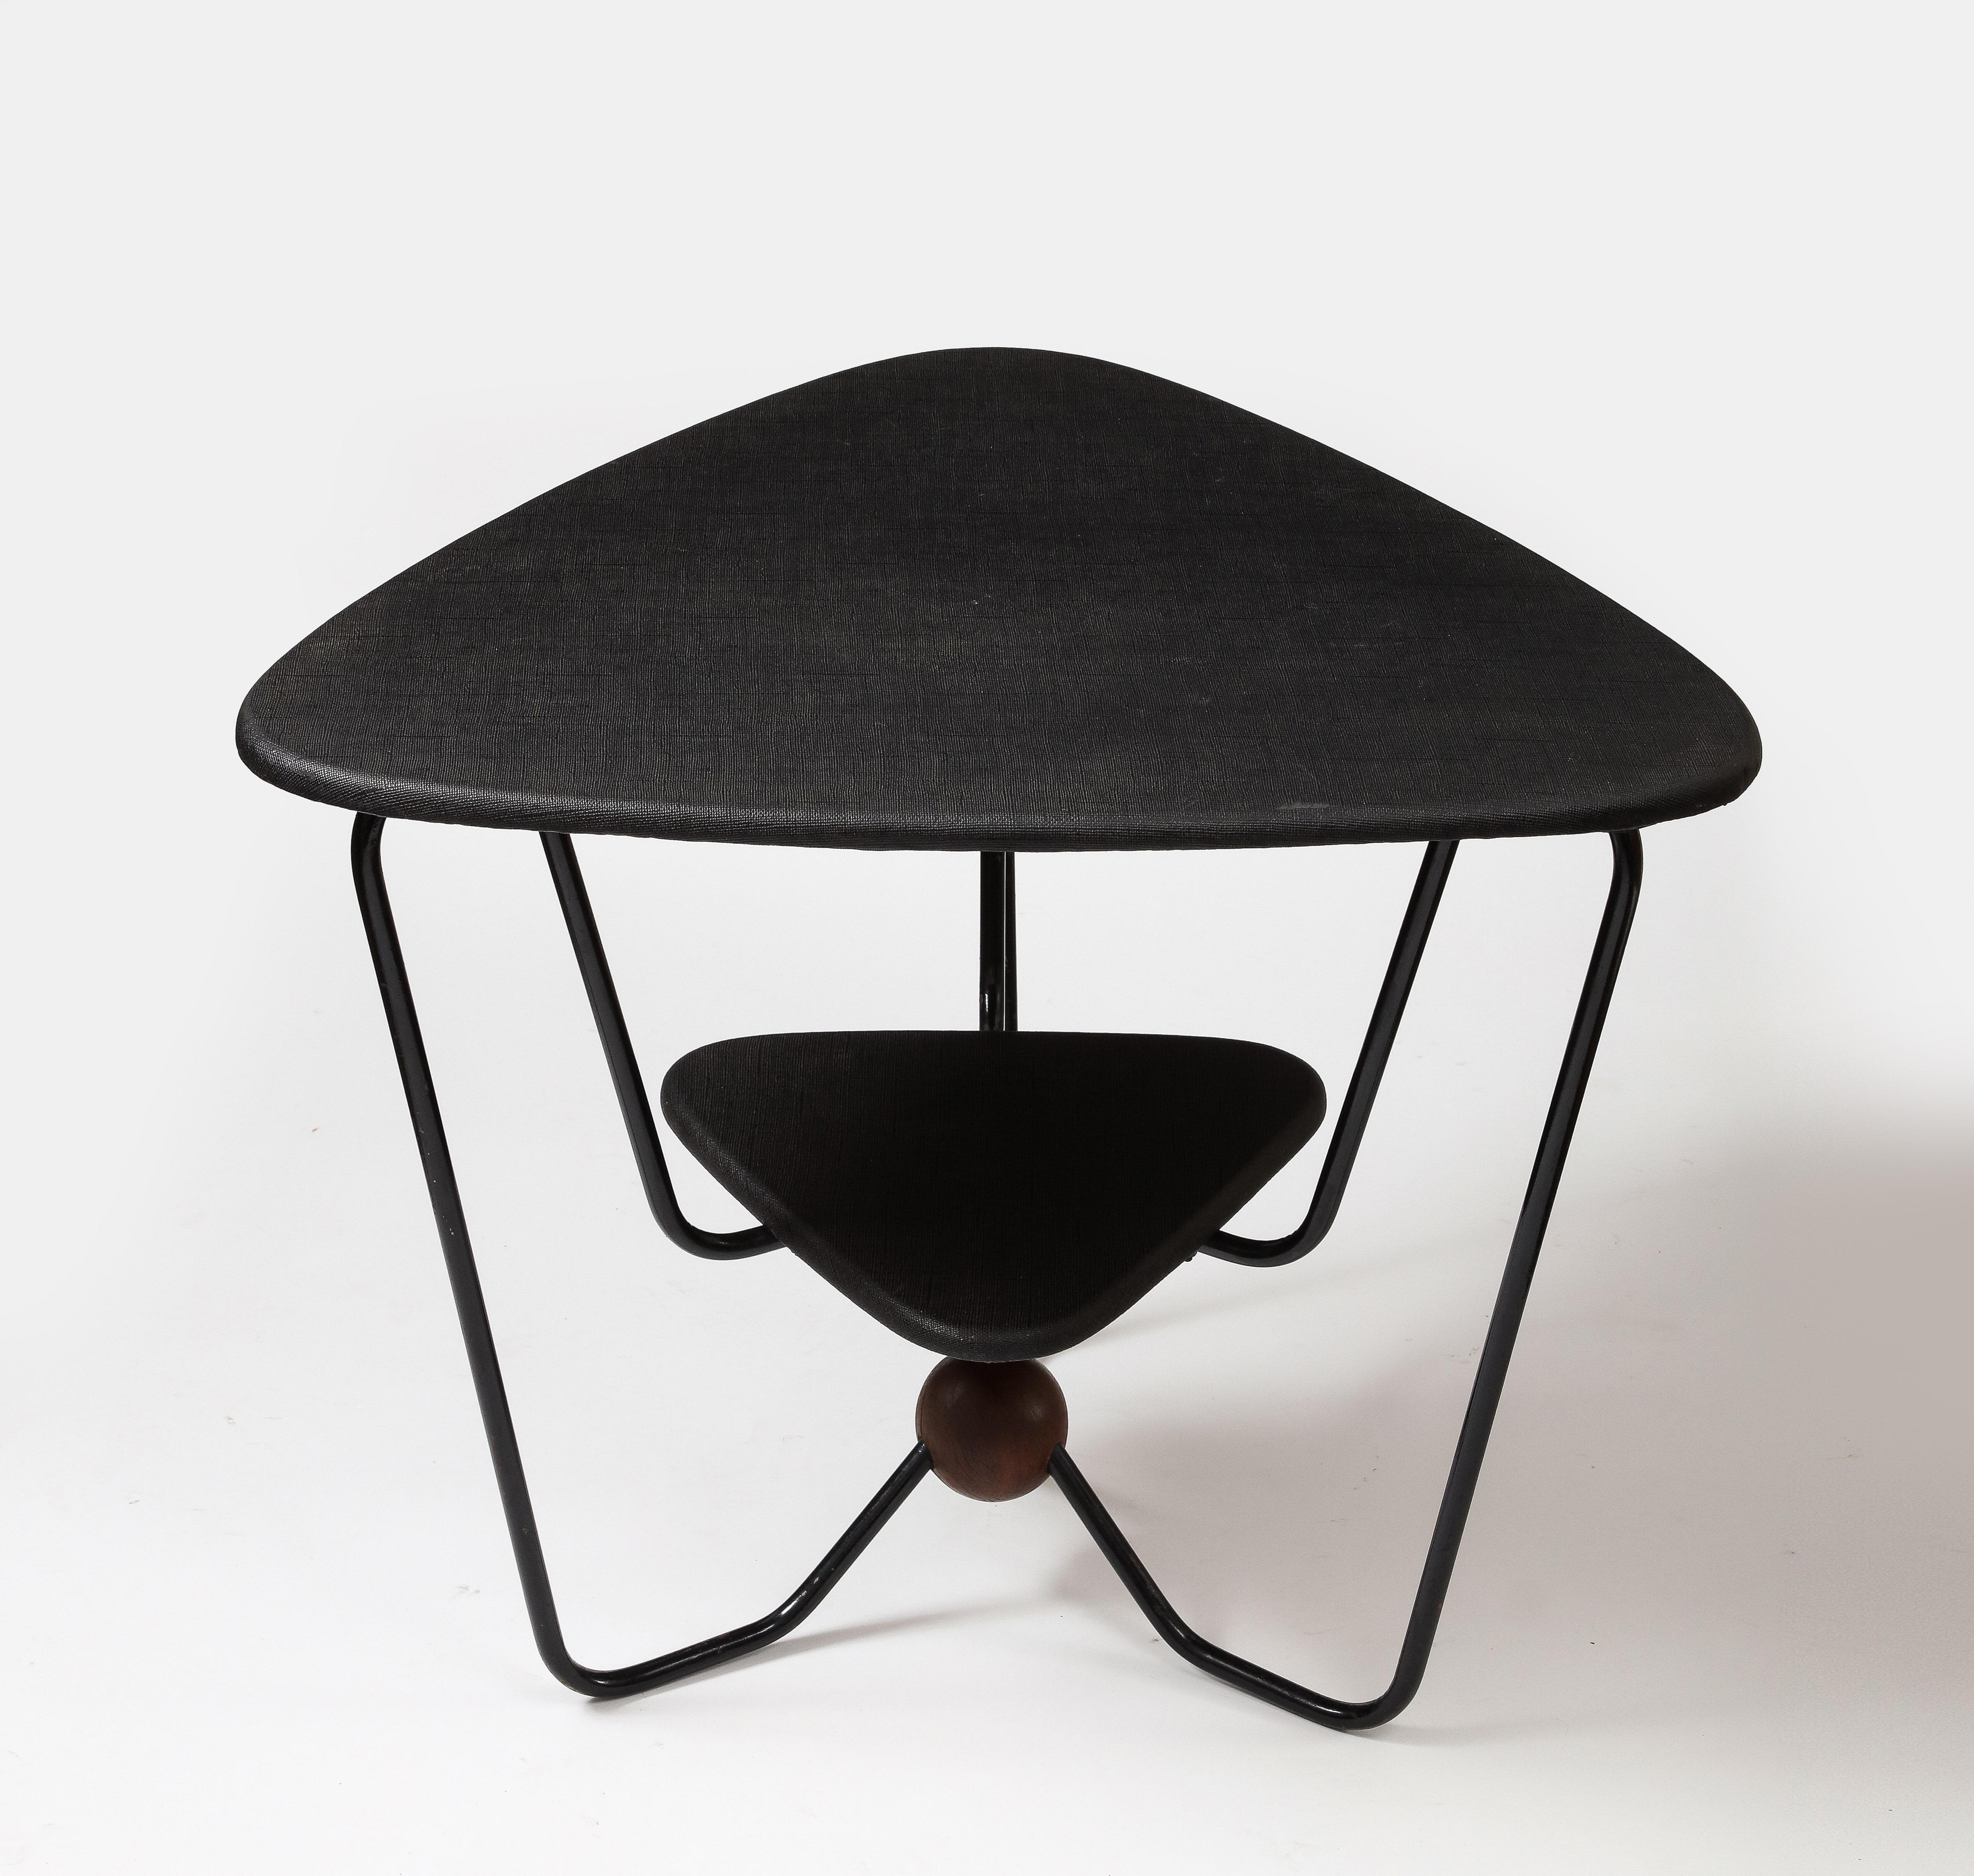 Italian Triangular Steel, Walnut, and Textile Side Table, Italy, c. 1960 For Sale